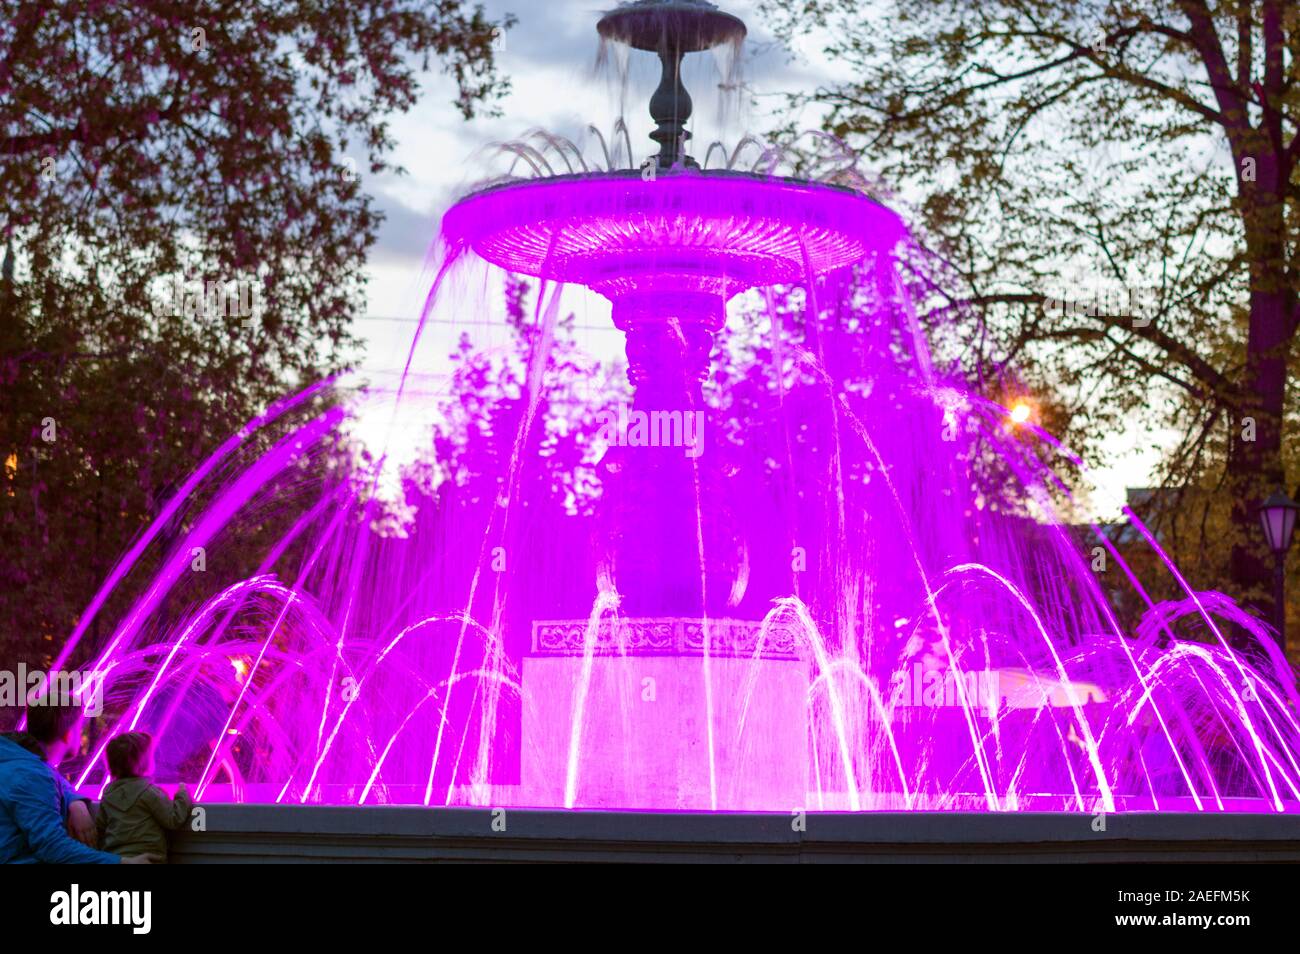 The city fountain, in Minin Square, is highlighted in different colors, yellow, purple, red. Close-up. Russia. Stock Photo